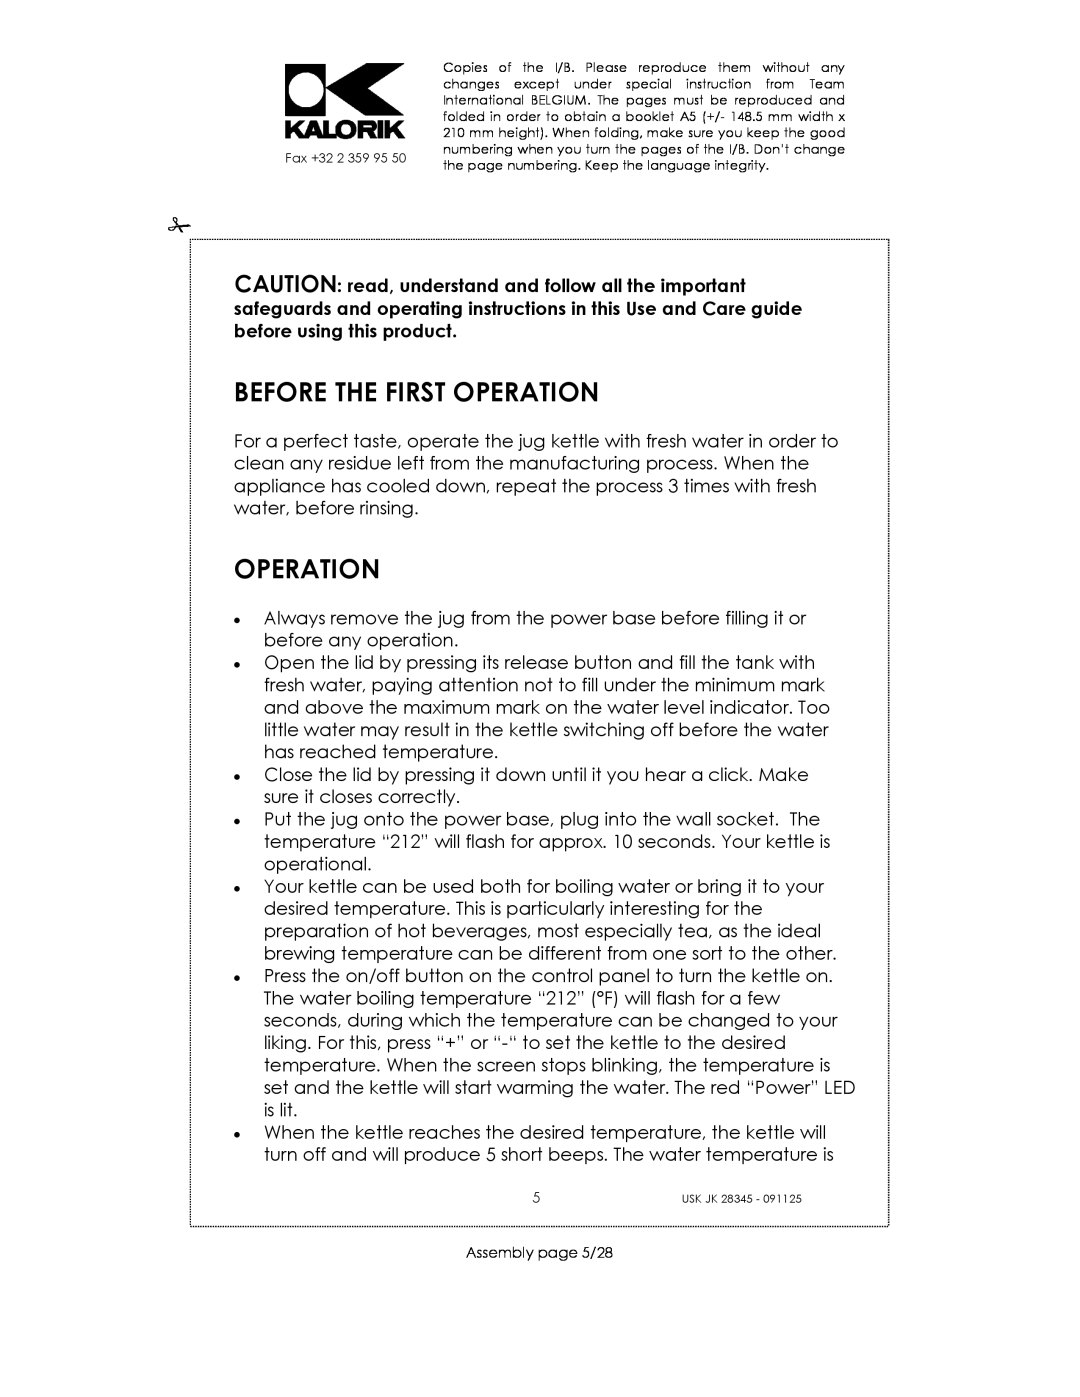 Kalorik USK JK 28345 manual Before The First Operation, Assembly page 5/28 